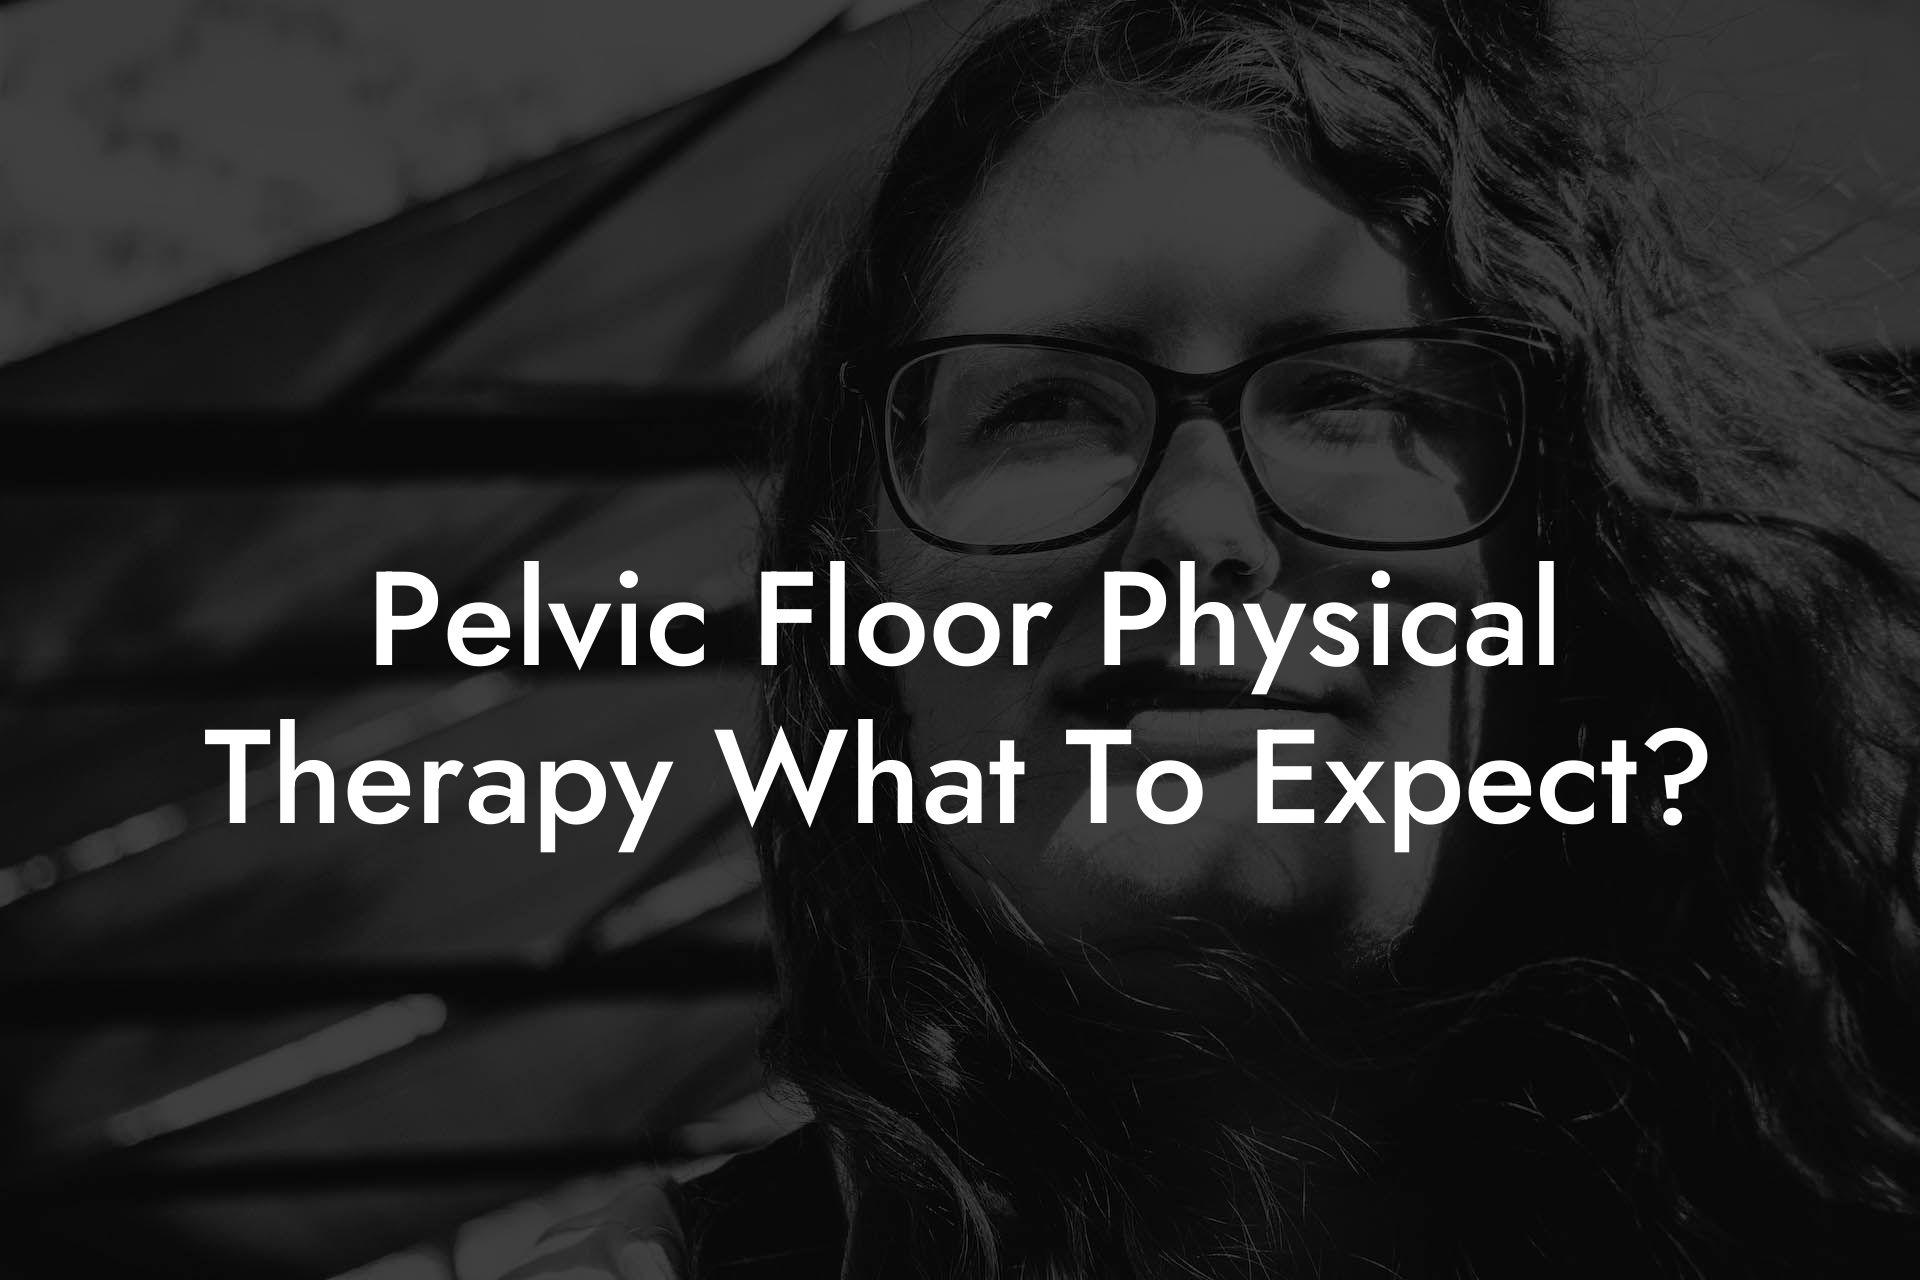 Pelvic Floor Physical Therapy What To Expect?